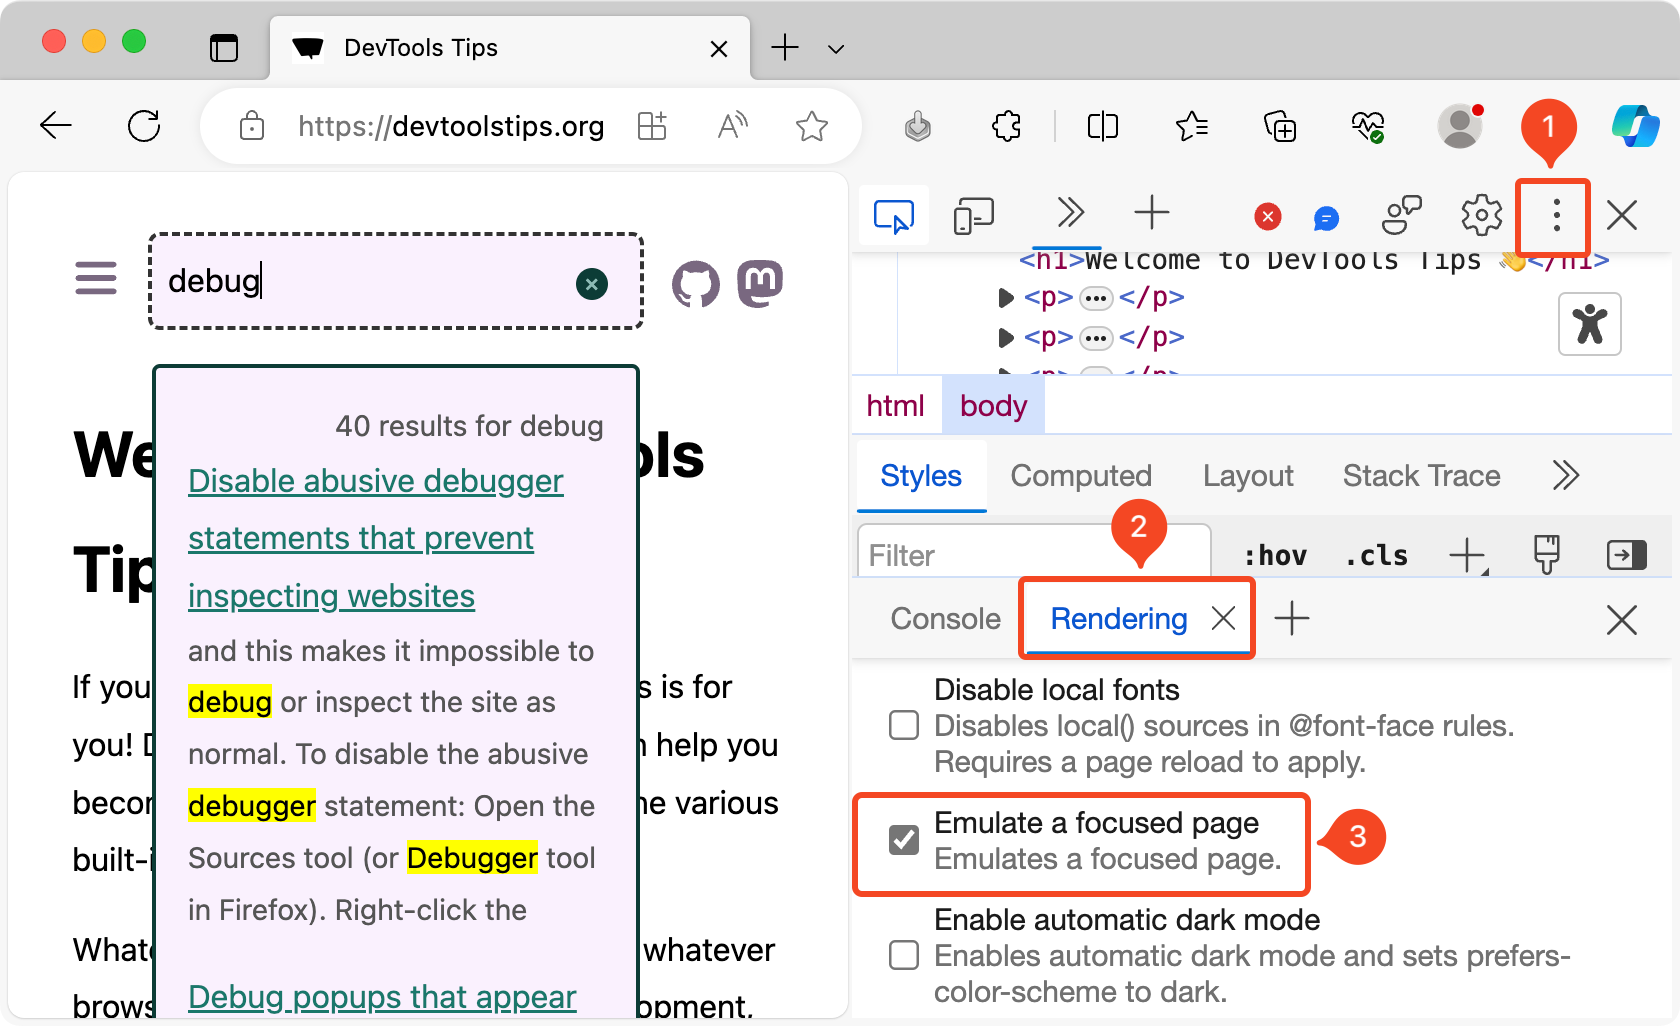 The Rendering tool in DevTools, showing the Emulate a focused page option